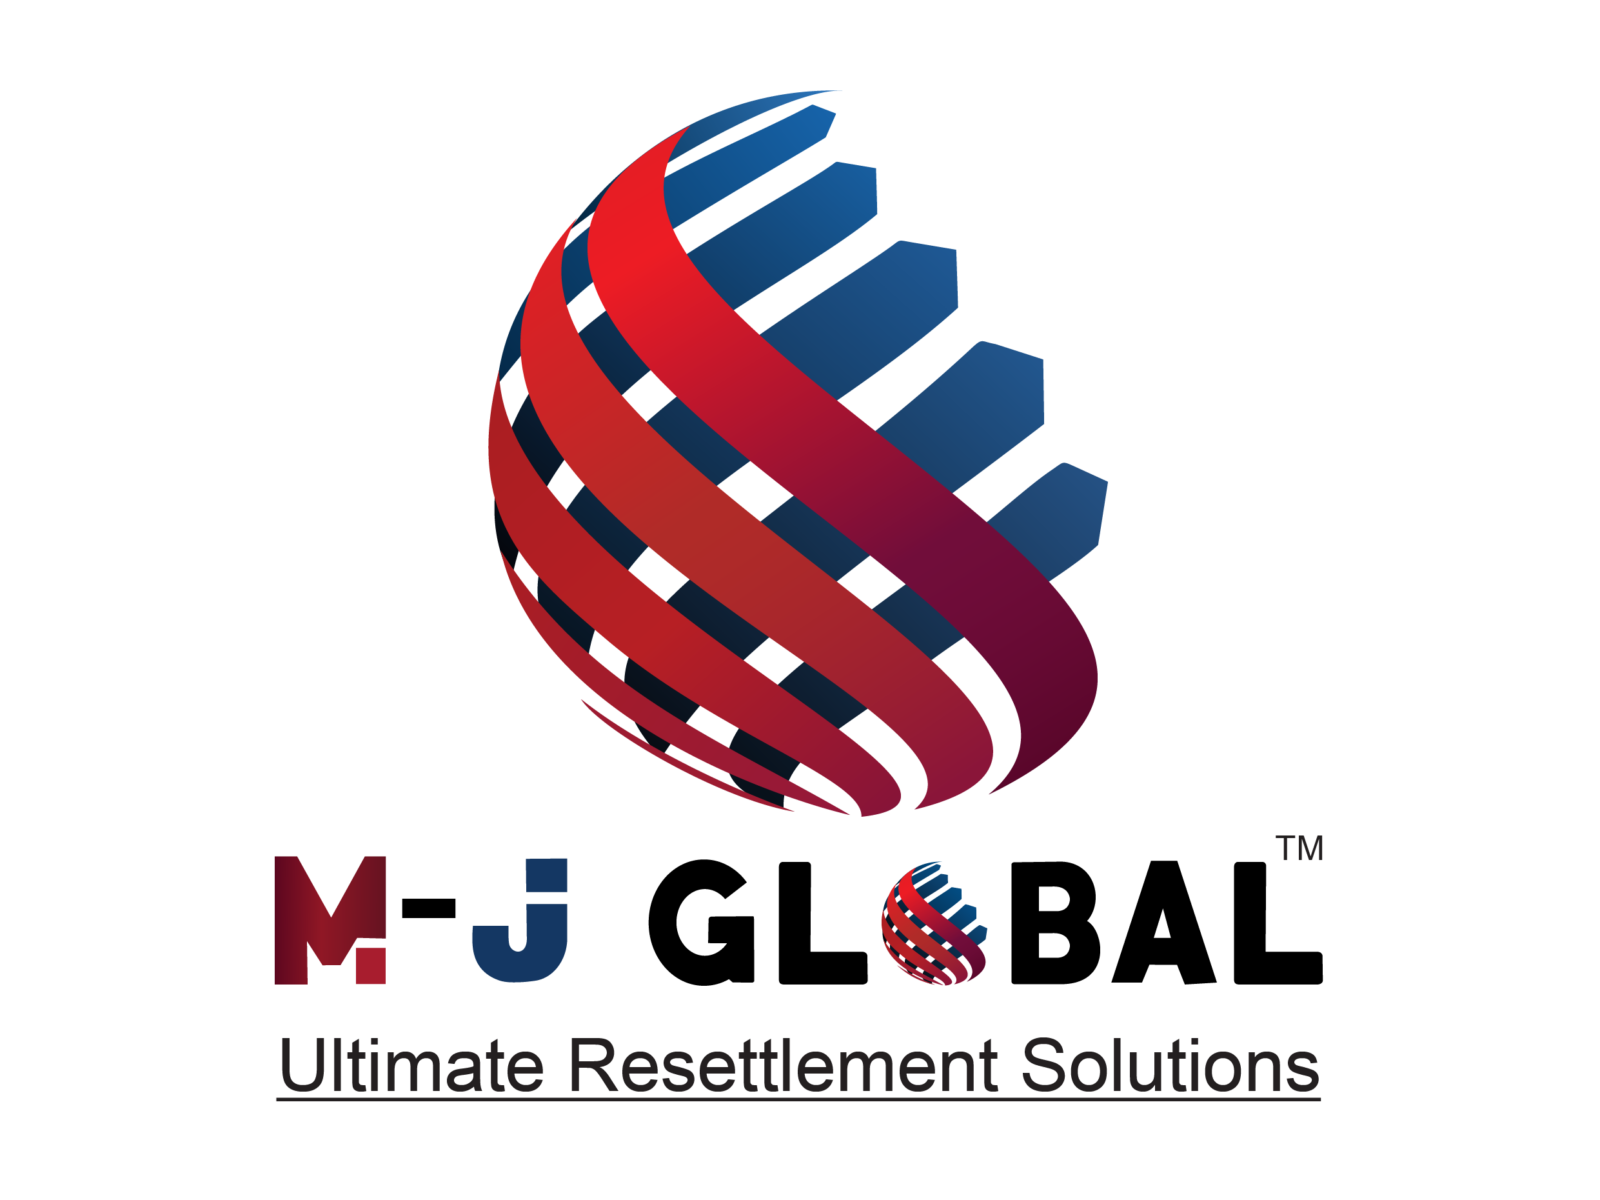 M-J Global: The epitome of excellence in Business Services